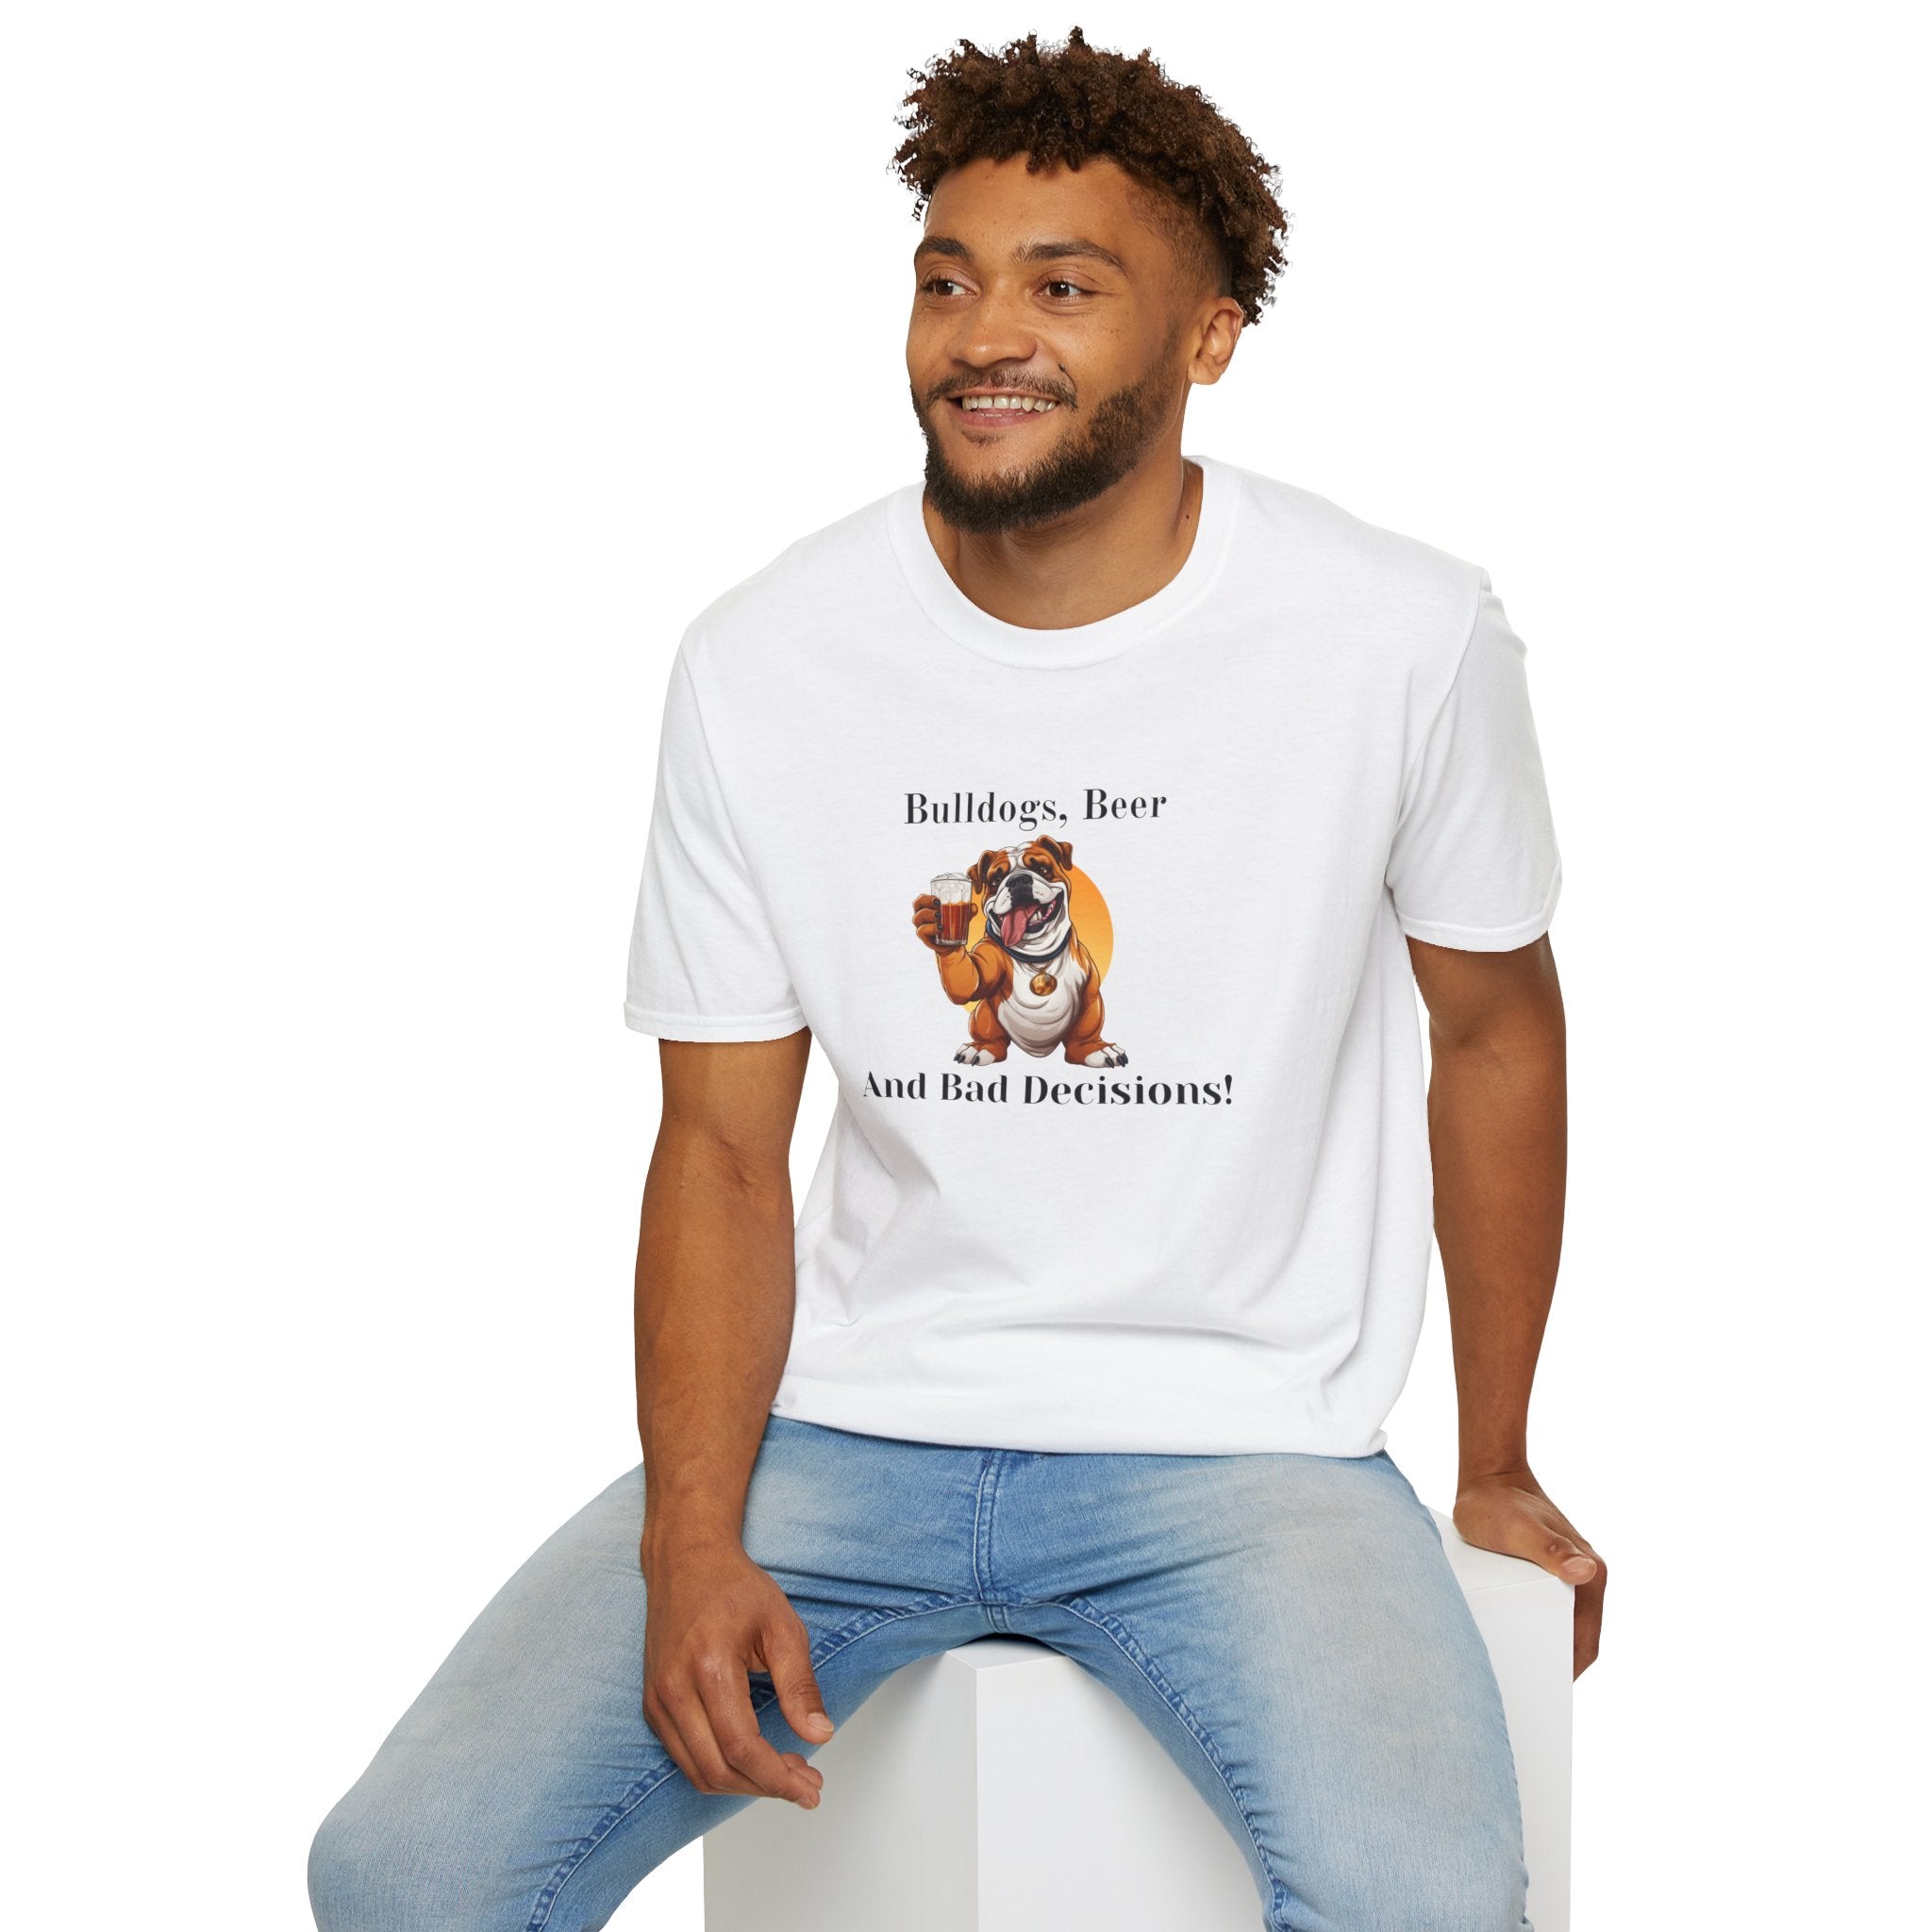 Bulldogs, Beer, and Bad Decisions" Unisex T-Shirt by Tipsy Bully (English/Brown)